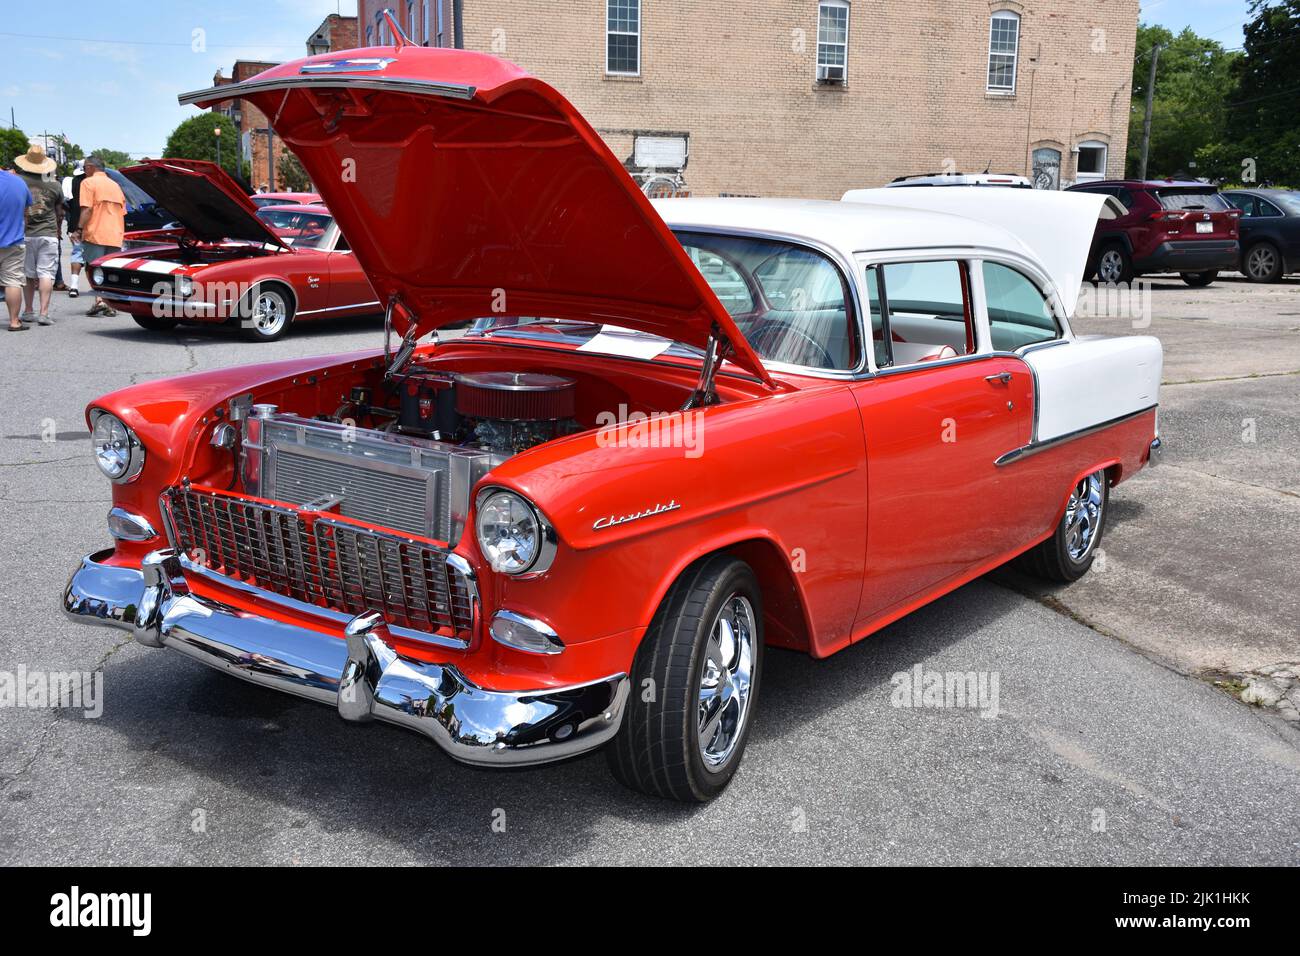 A Red and White 1955 Chevrolet on display at a car show. Stock Photo